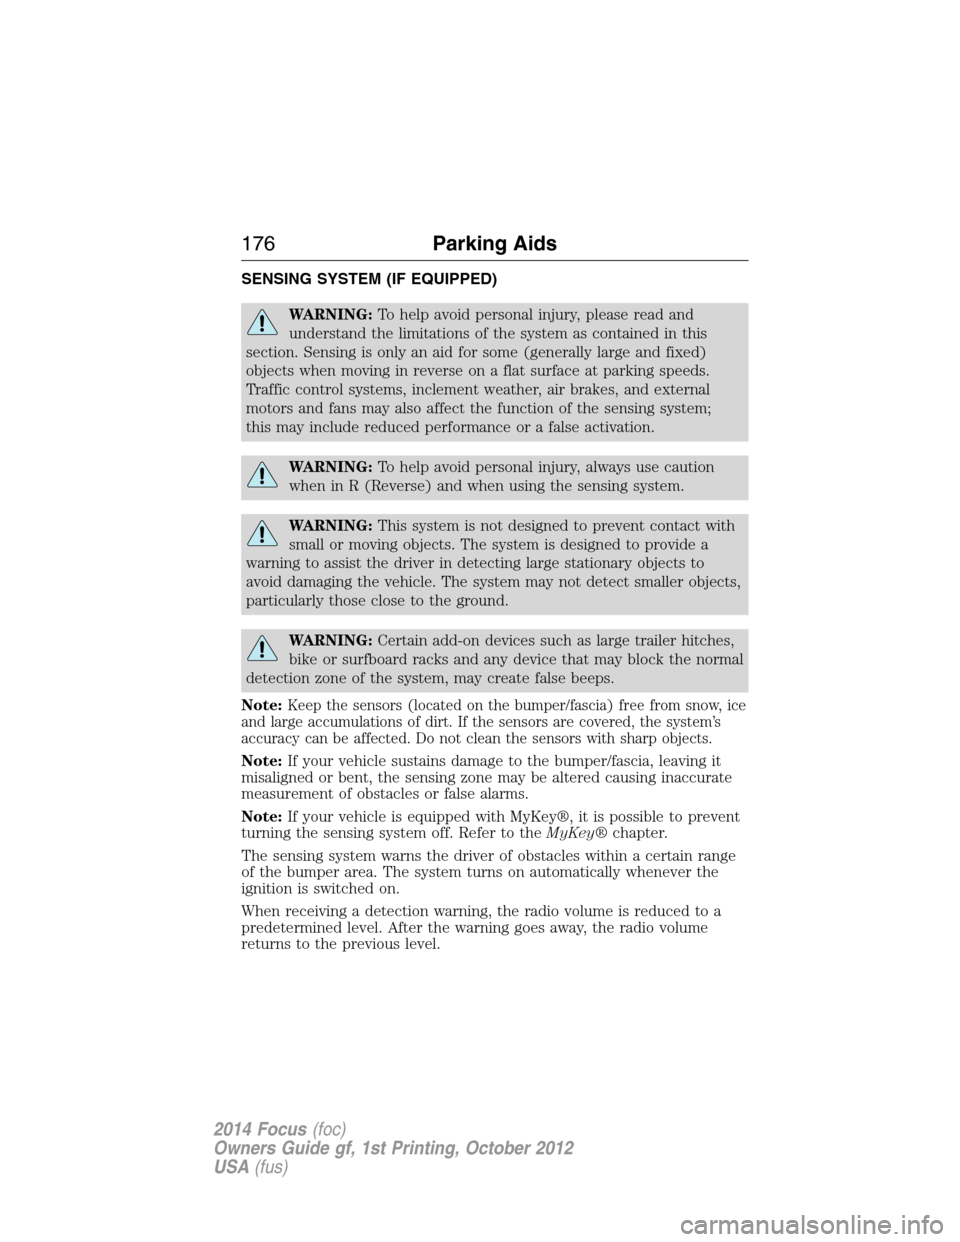 FORD FOCUS 2014 3.G Owners Guide SENSING SYSTEM (IF EQUIPPED)
WARNING:To help avoid personal injury, please read and
understand the limitations of the system as contained in this
section. Sensing is only an aid for some (generally la